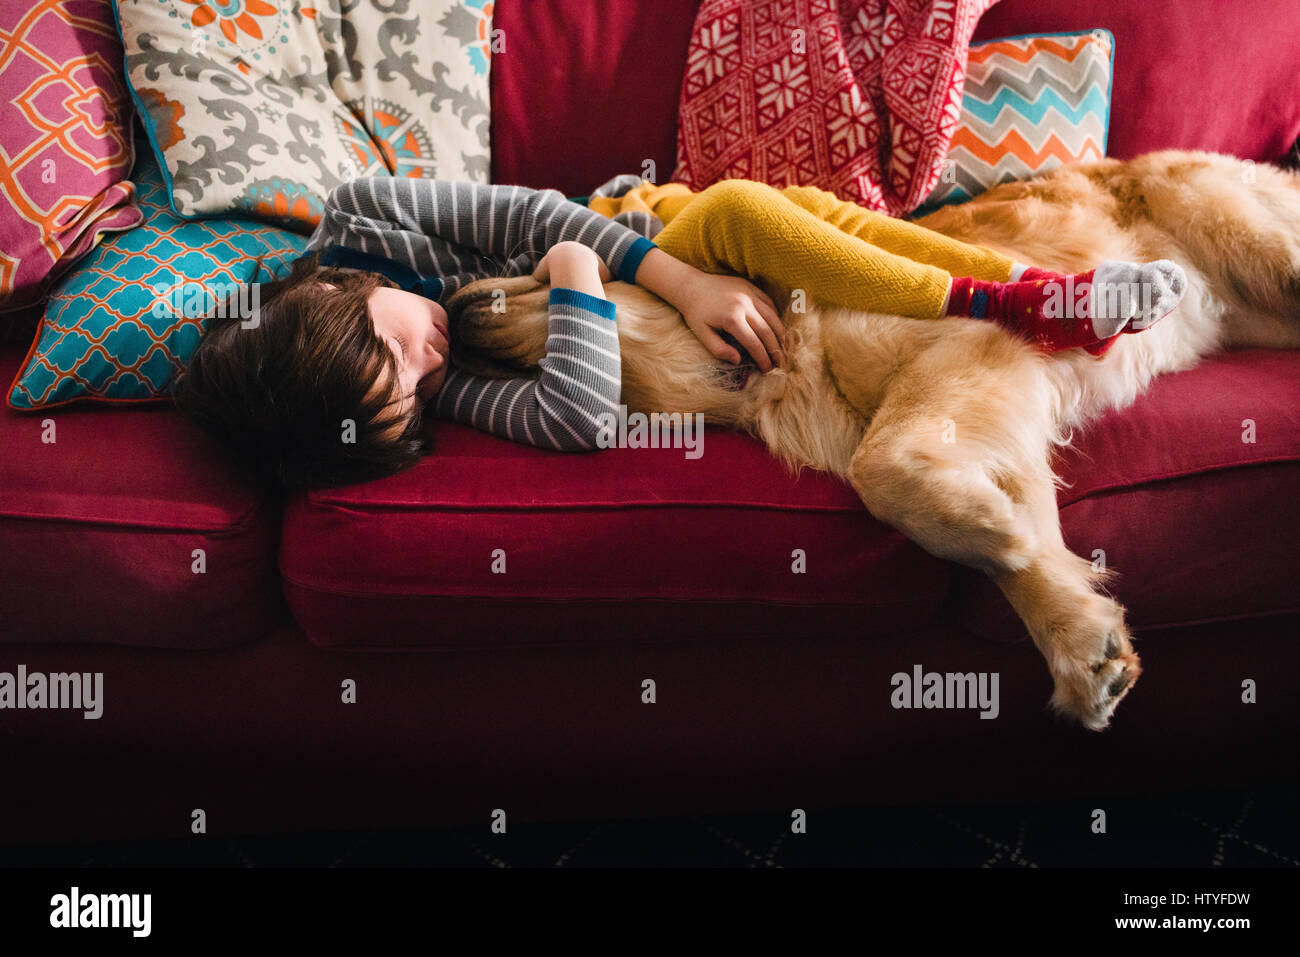 Girl sleeping on couch with golden retriever dog Stock Photo